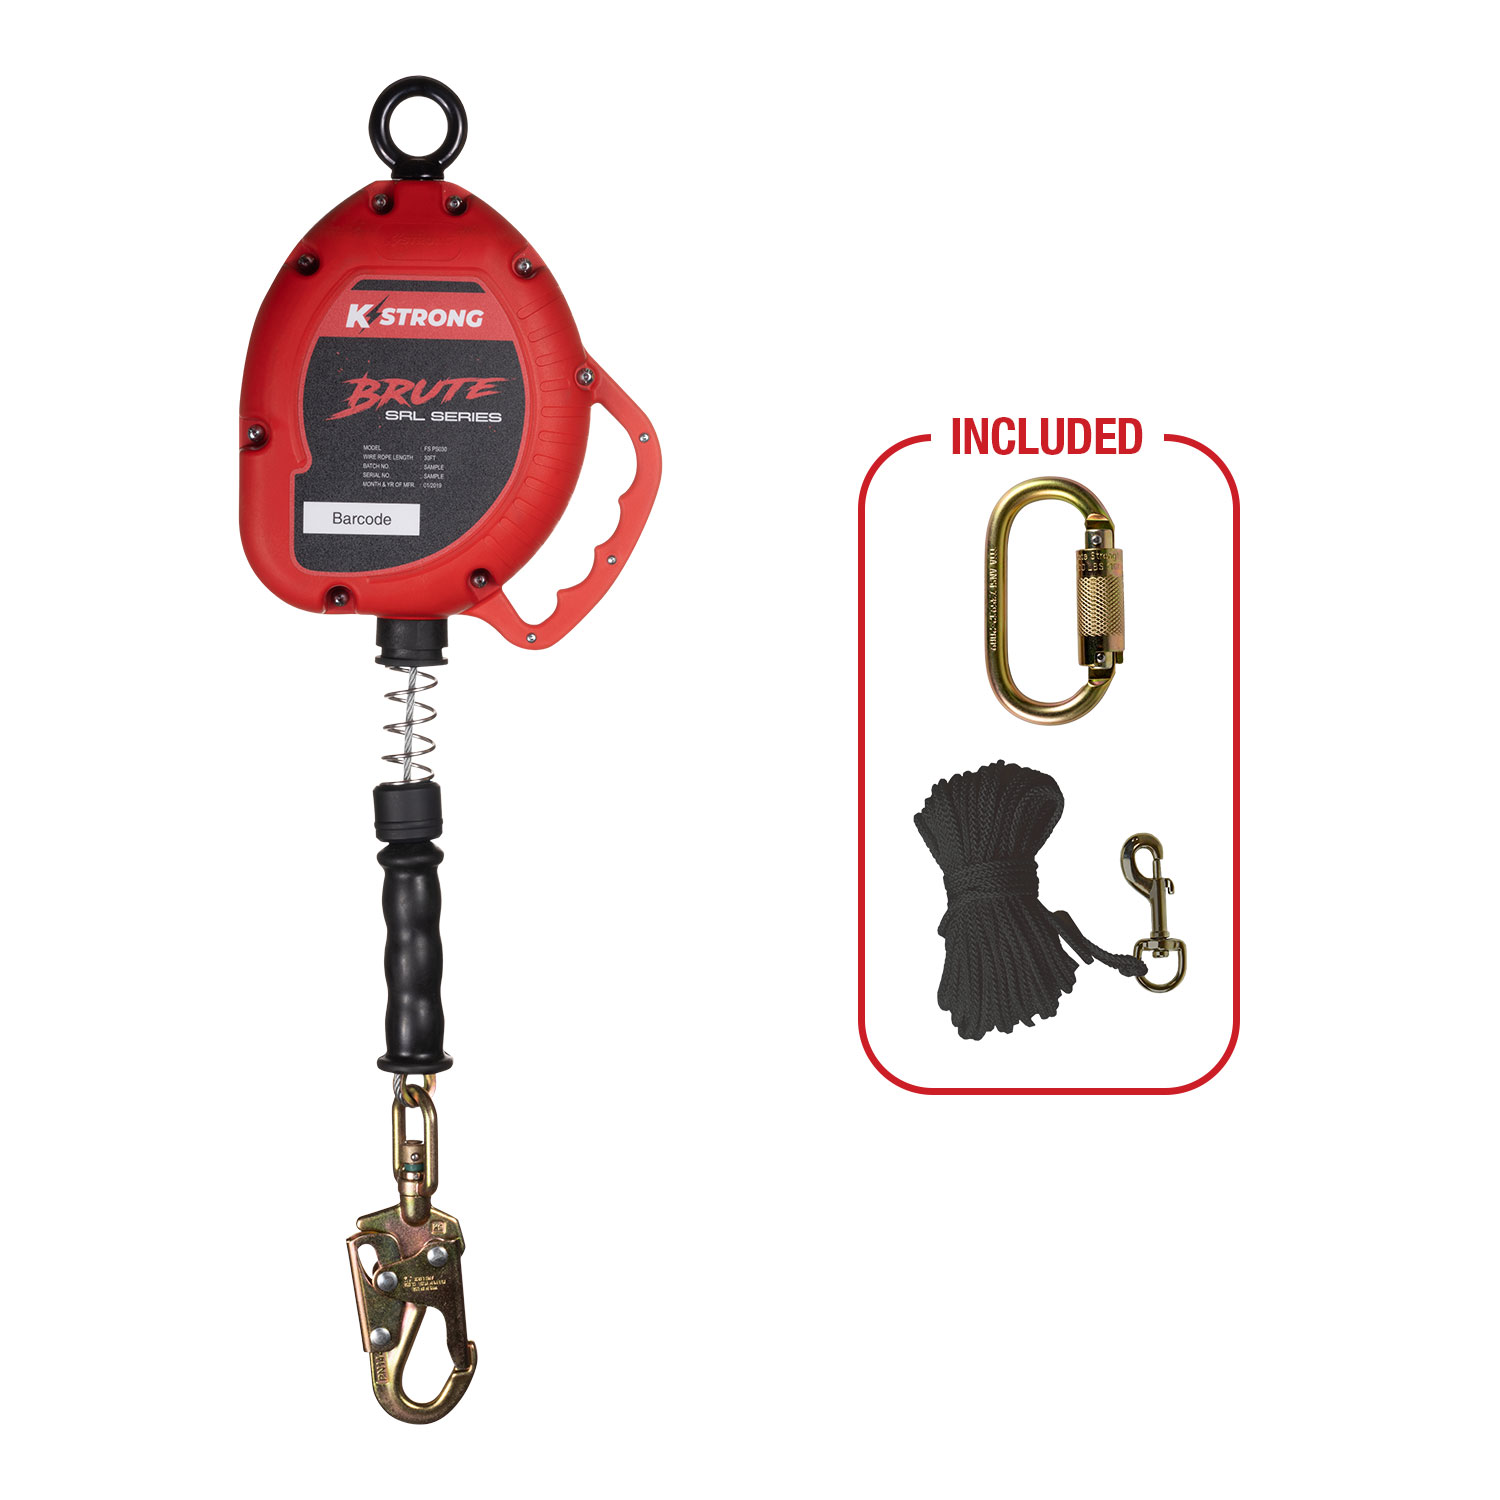 KStrong BRUTE 30 ft. Cable SRL with Snap Hook, Includes Installation Carabiner and Tagline (ANSI), UFS310030